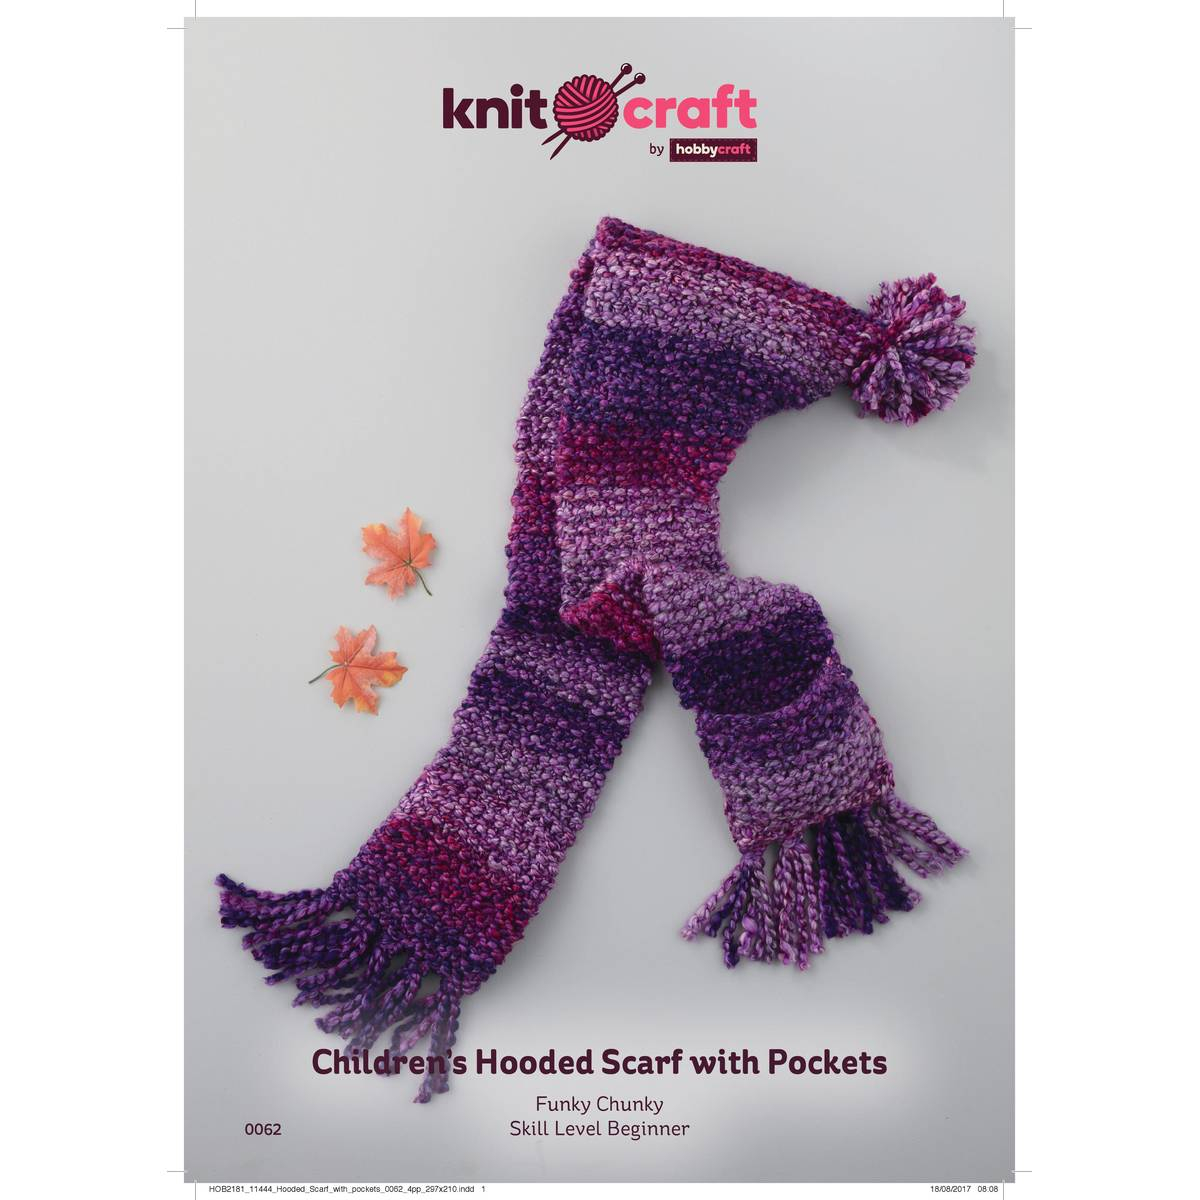 Loom Knit Hooded Scarf Pattern Knitcraft Childrens Hooded Scarf With Pockets Digital Pattern 0062